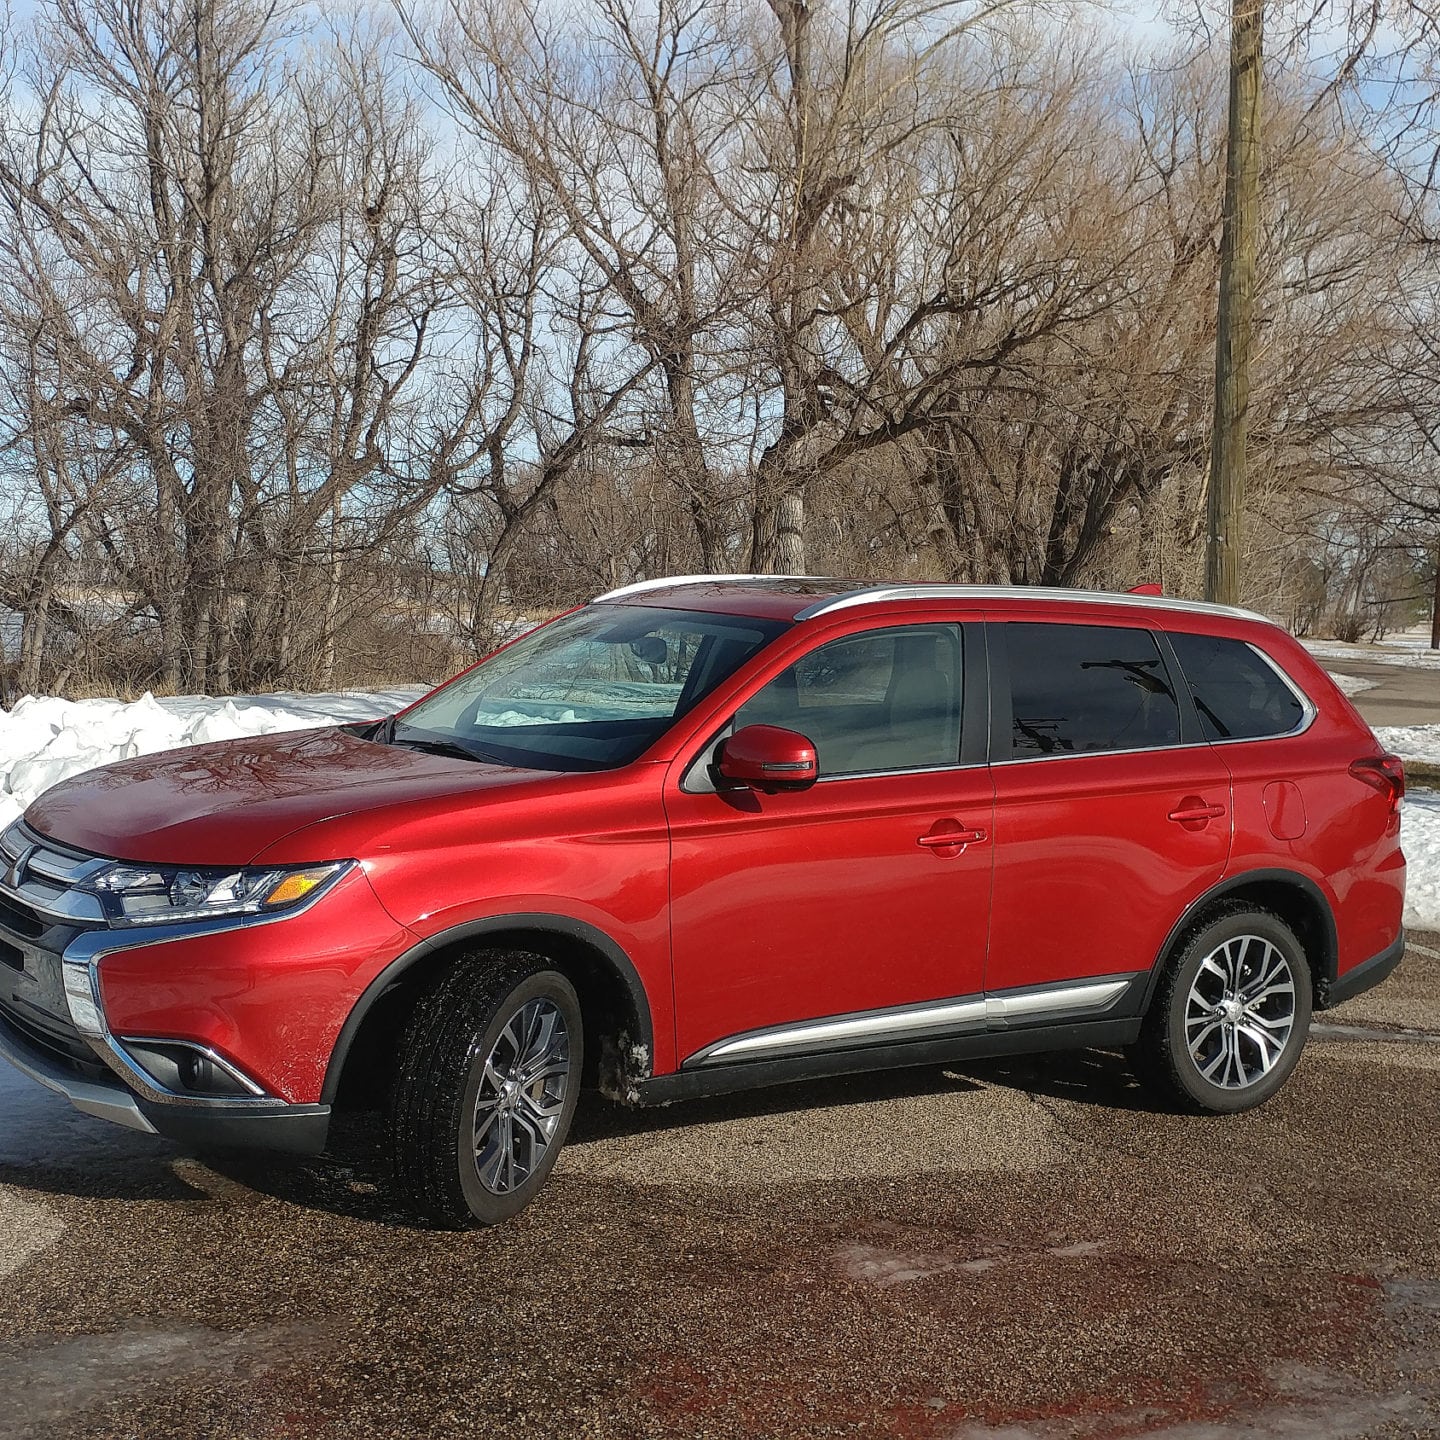 2018 Mitsubishi Outlander is Cheap All-Weather Capability – CarNewsCafe